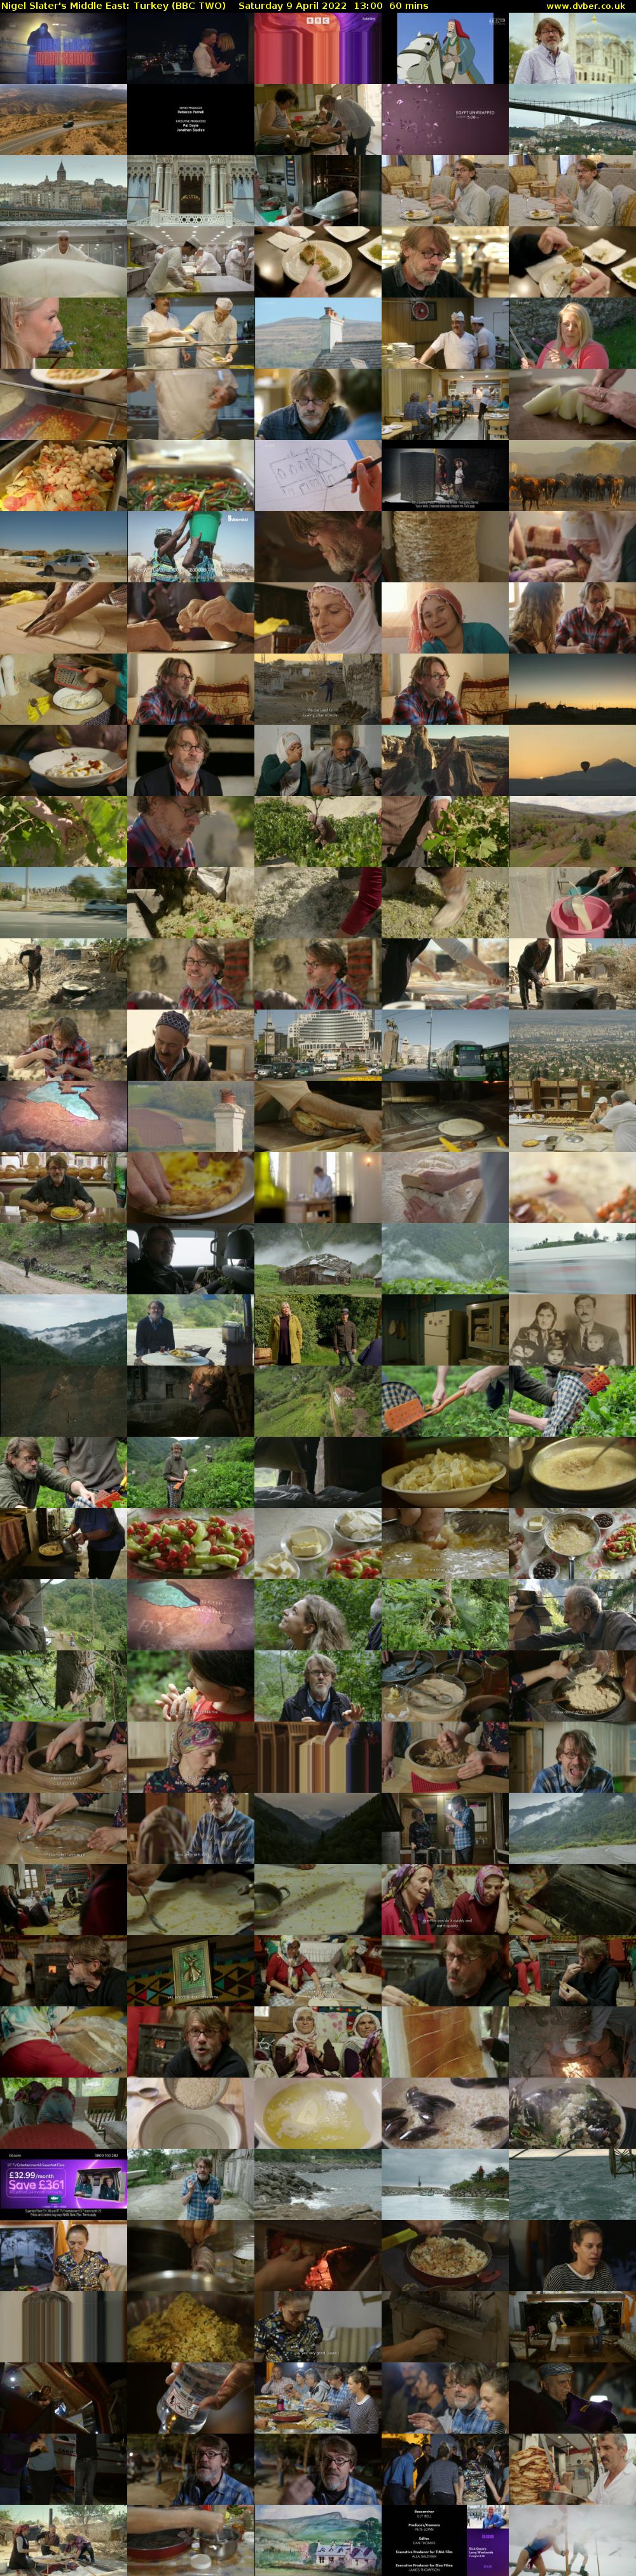 Nigel Slater's Middle East: Turkey (BBC TWO) Saturday 9 April 2022 13:00 - 14:00